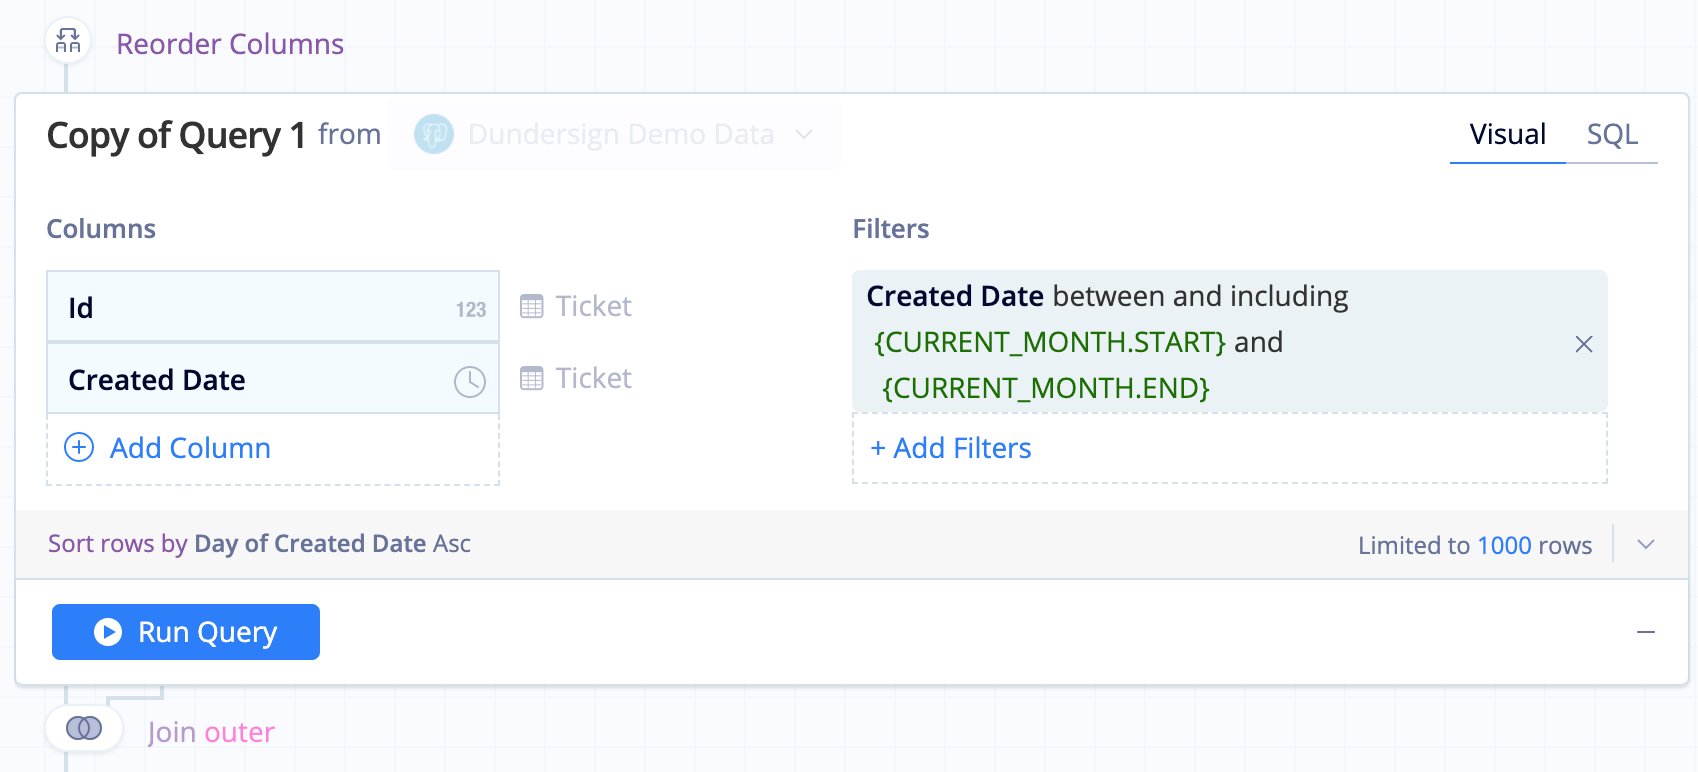 Modify the filter and Previous Month column name in Copy of Query 1